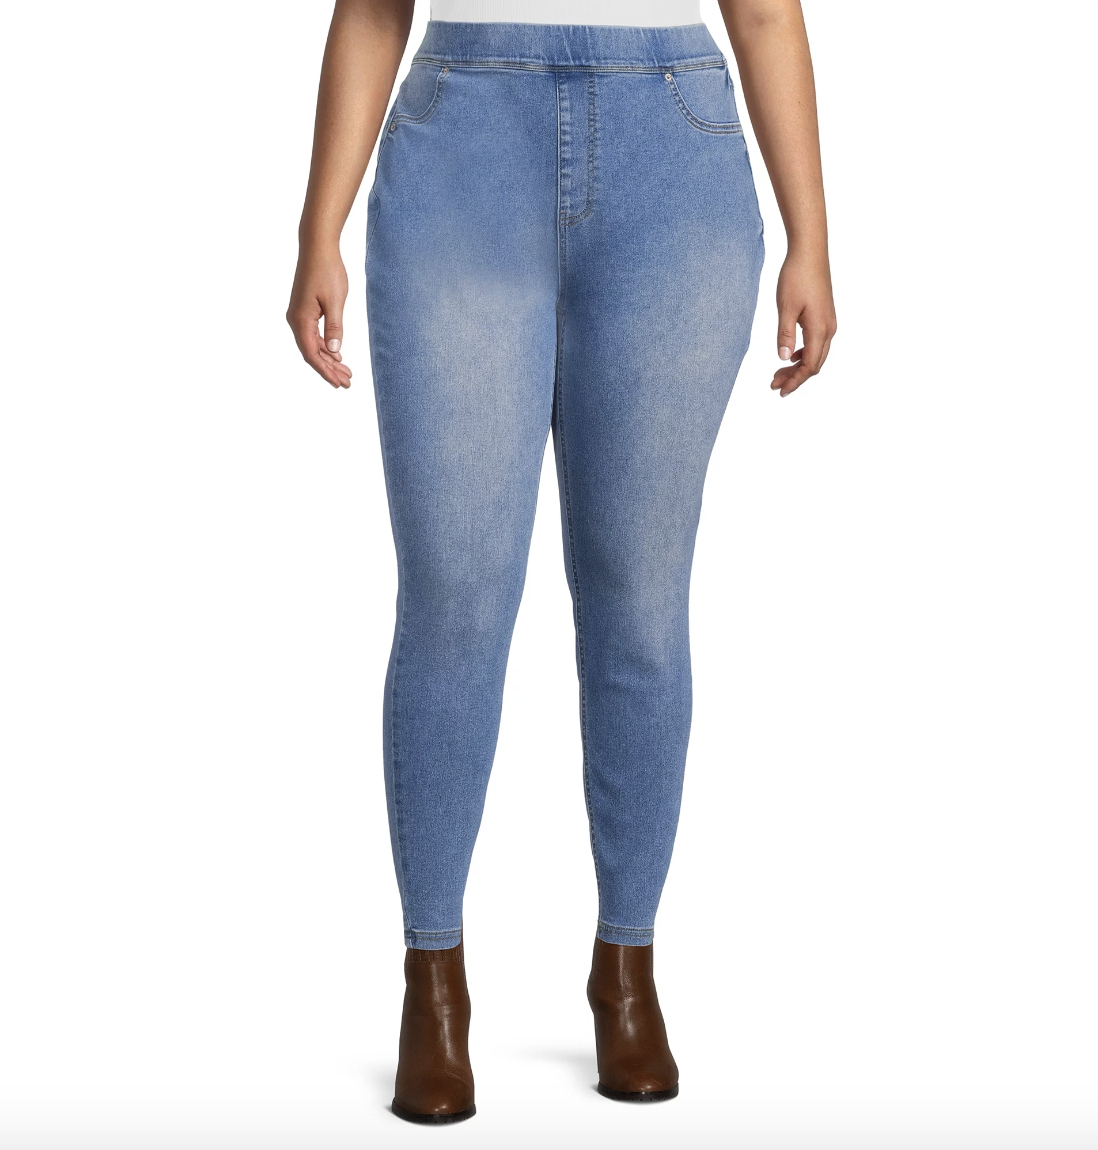 A pair of jeggings